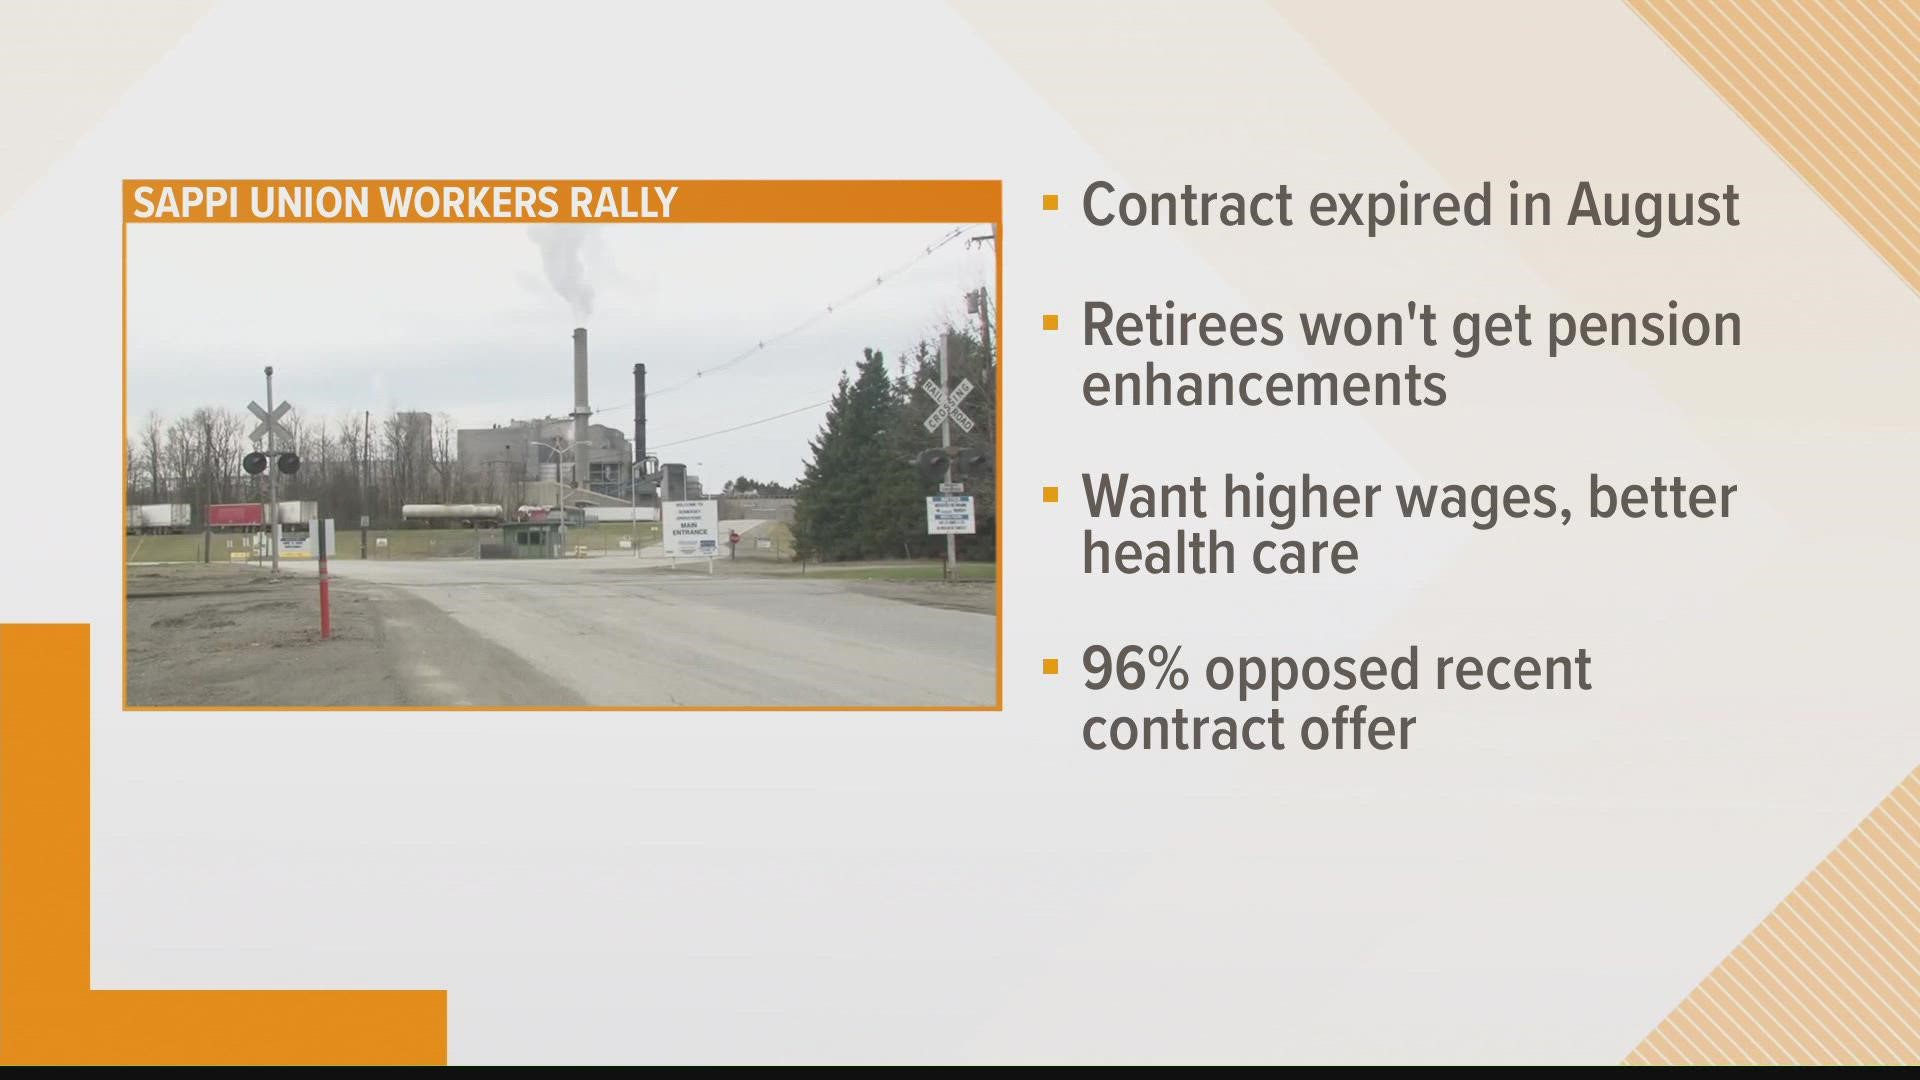 According to the President of "United Steelworkers Local 9", union members weren't able to negotiate a new contract until the most recent one expired.